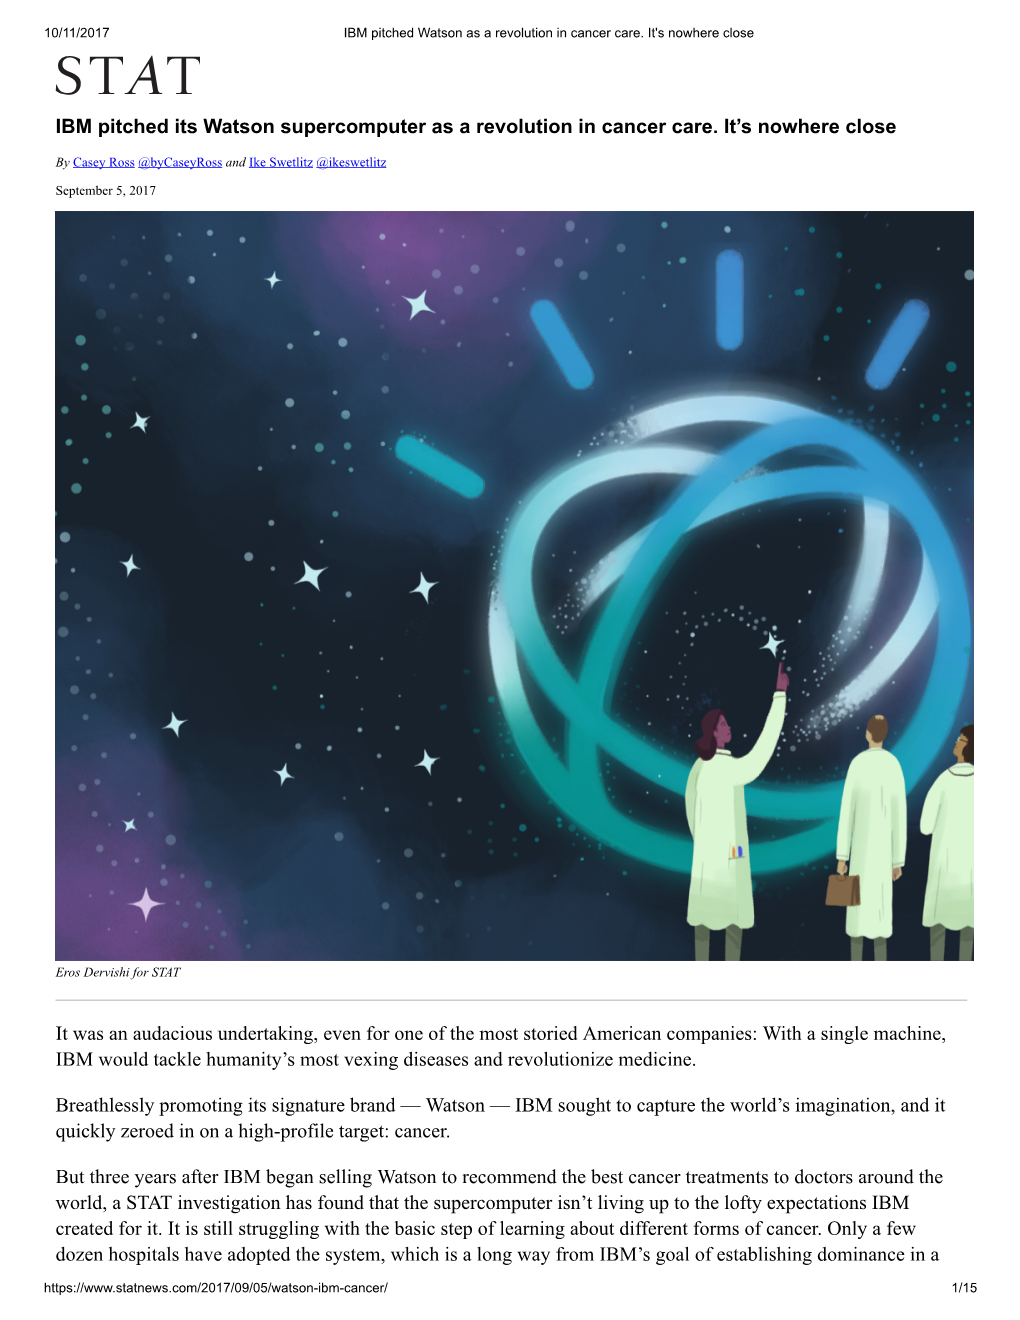 I IBM Pitched Its Watson Supercomputer As a Revolution In